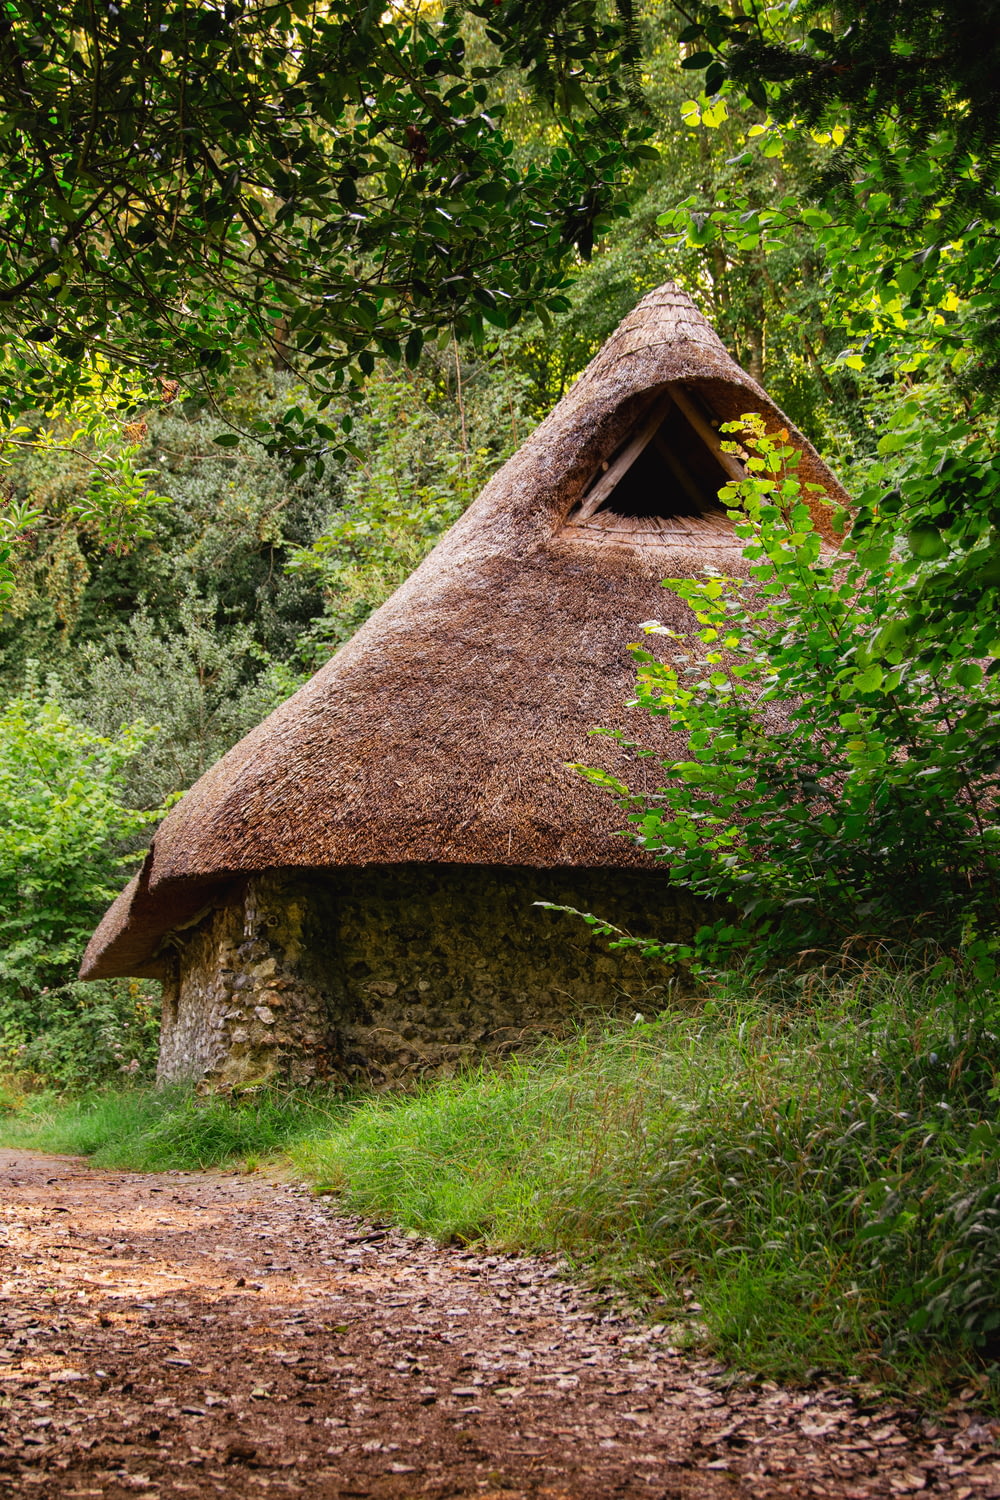 a stone building with a thatched roof in the woods